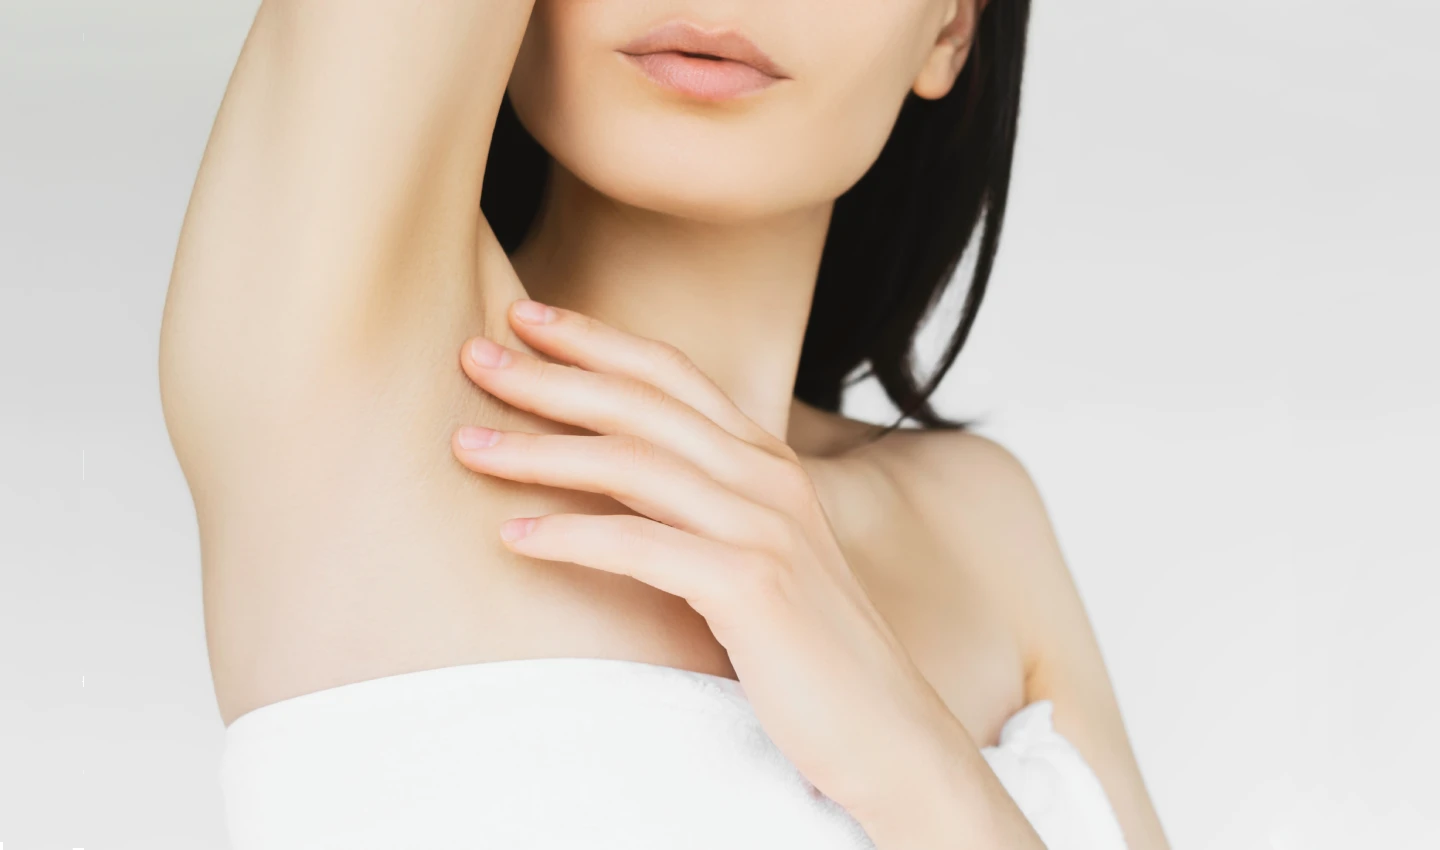 An image of a young woman's shoulder with white and sensitive skin, emphasizing the importance of using appropriate sensitive skin moisturisers.